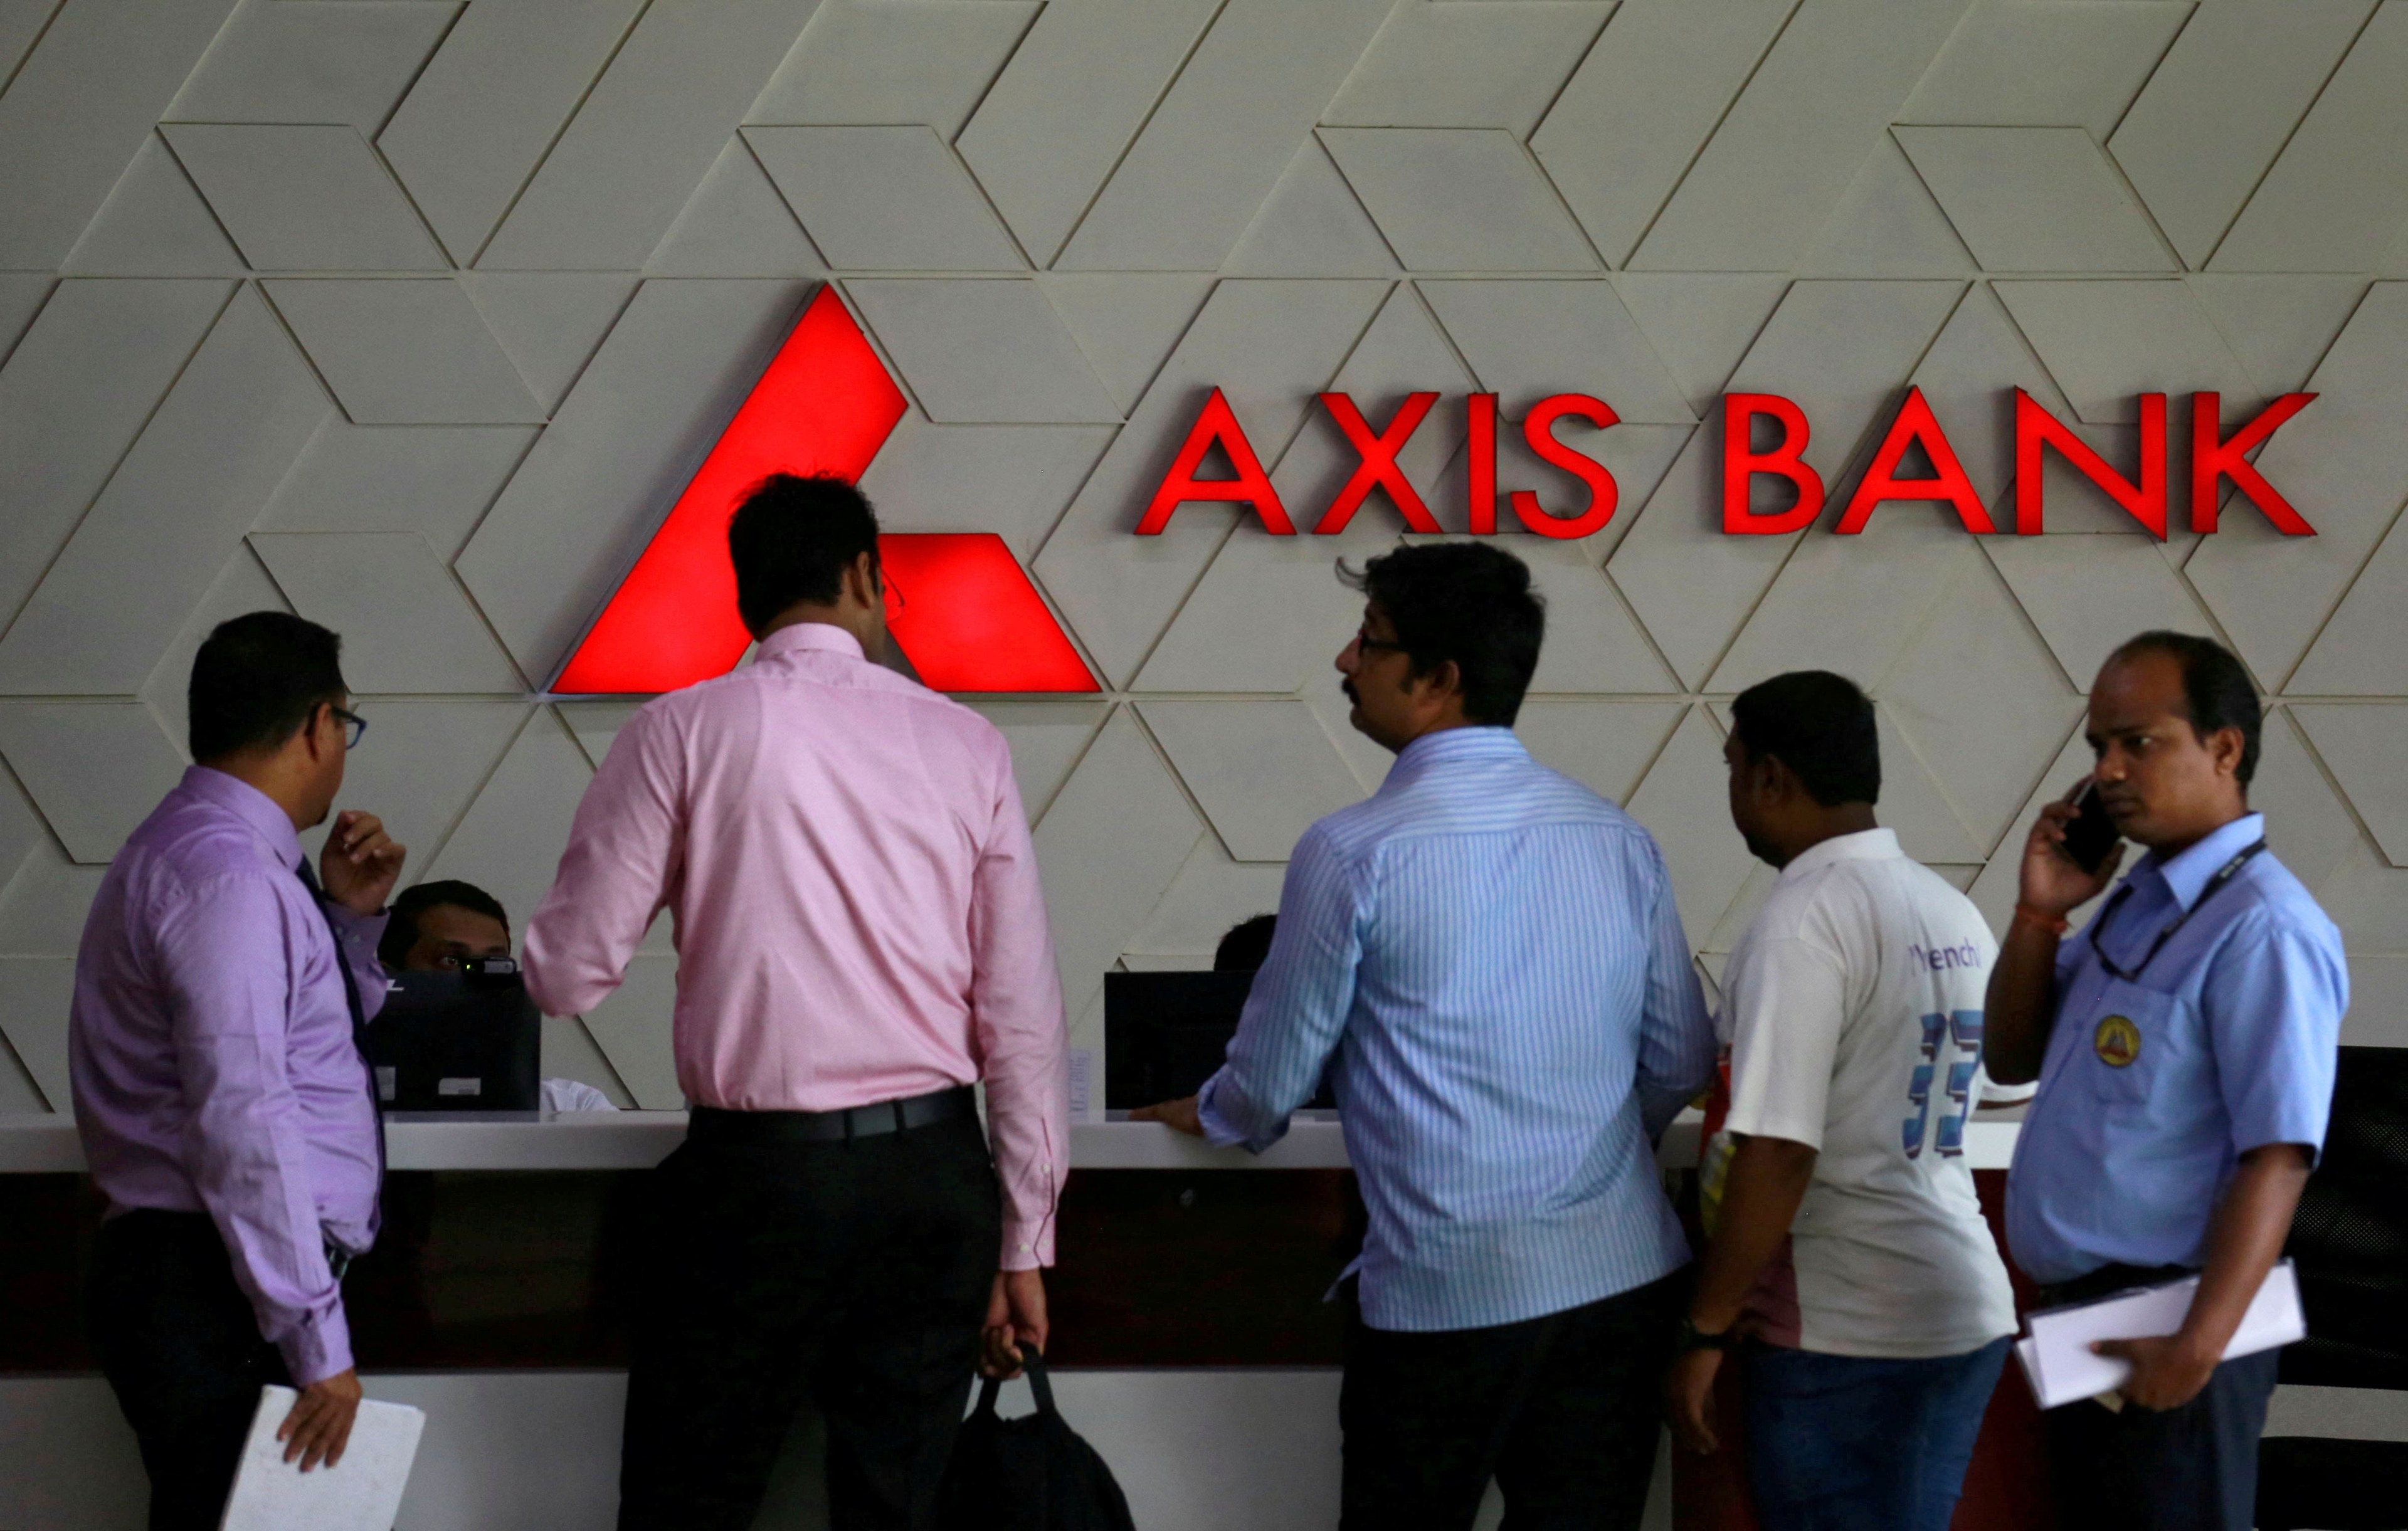 Axis Bank: The brokerage has a 'buy' call on the stock with a target of  <span class='webrupee'>₹</span>960 per share, indicating an upside of 26 percent. The lender will acquire Citi’s credit card, deposits, wealth management and branches in a deal valued at $1.6 billion, which is value accretive, said the brokerage. It added that while integration challenges remain a key concern, overall it is positive. Kotak further noted that rerating will be driven by performance of core bank. Levers are quite healthy to deliver closer to its peers on operating metrics, it said.